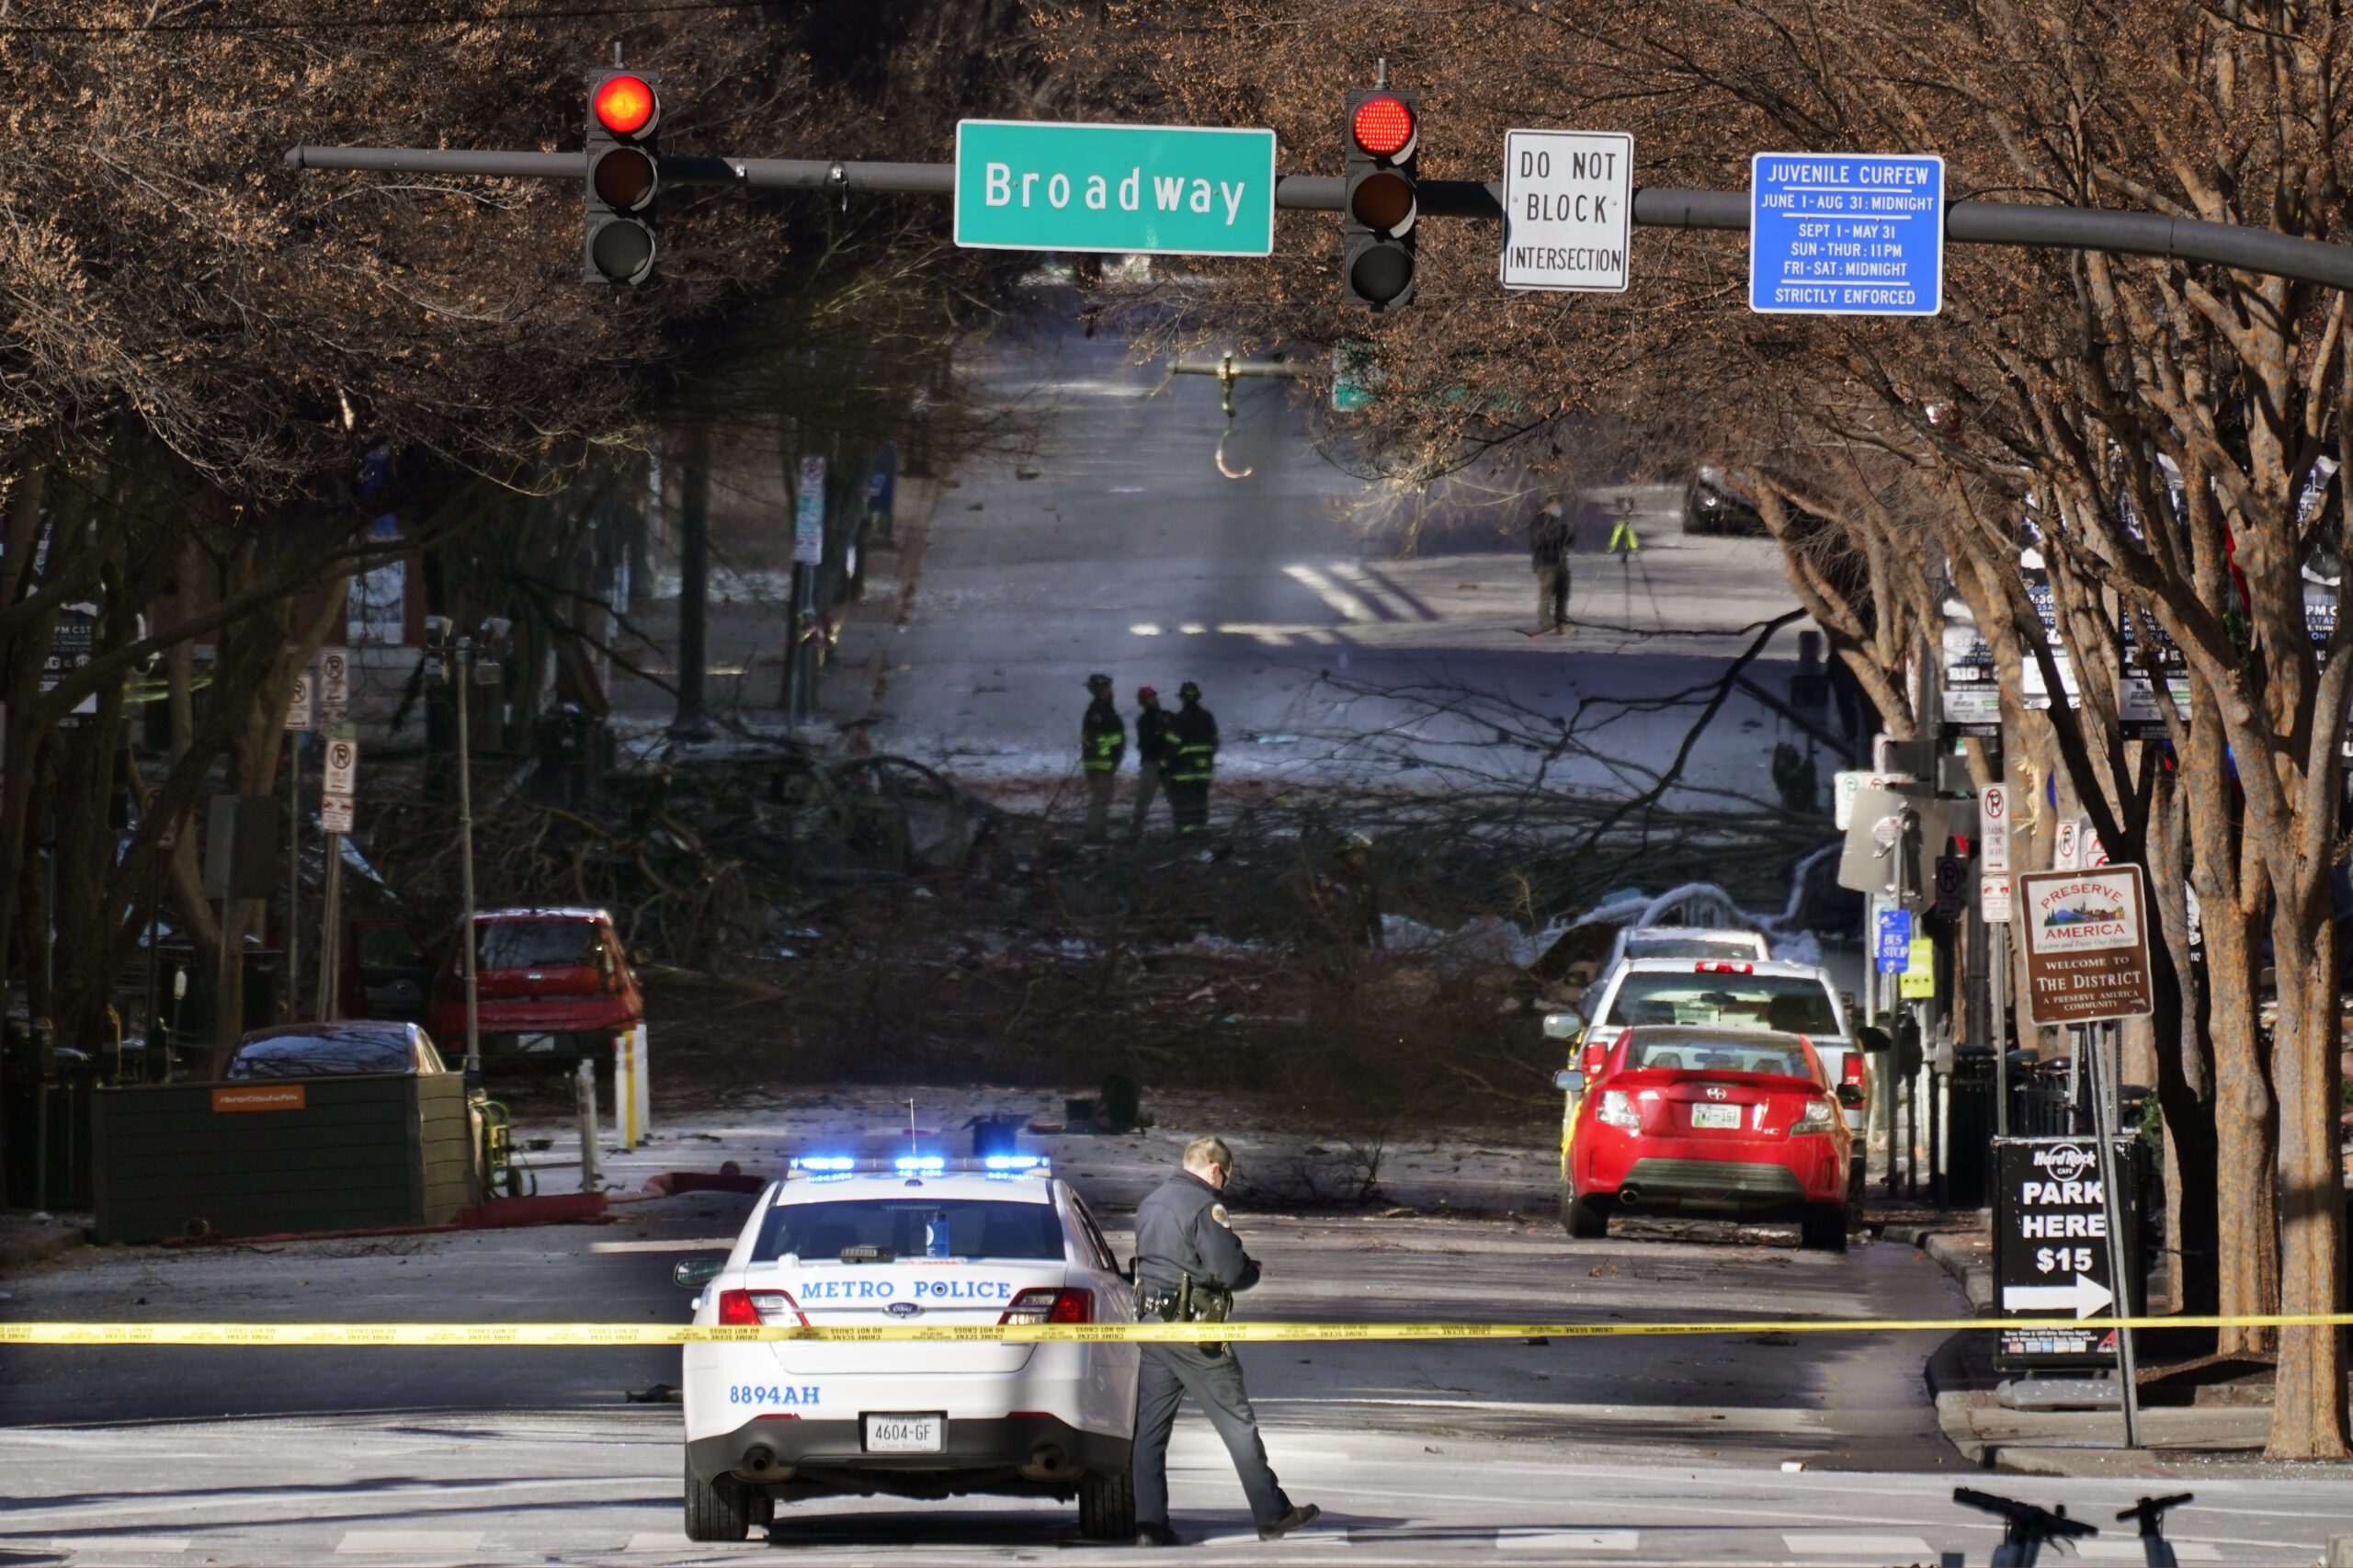 A Nashville Police officer blocks the entrance to the scene of an explosion Saturday, Dec. 26, 2020, in Nashville, Tenn. The explosion that shook the largely deserted streets of downtown Nashville early Christmas morning shattered windows, damaged buildings and wounded three people. Authorities said they believed the blast was intentional. (AP Photo/Mark Humphrey)